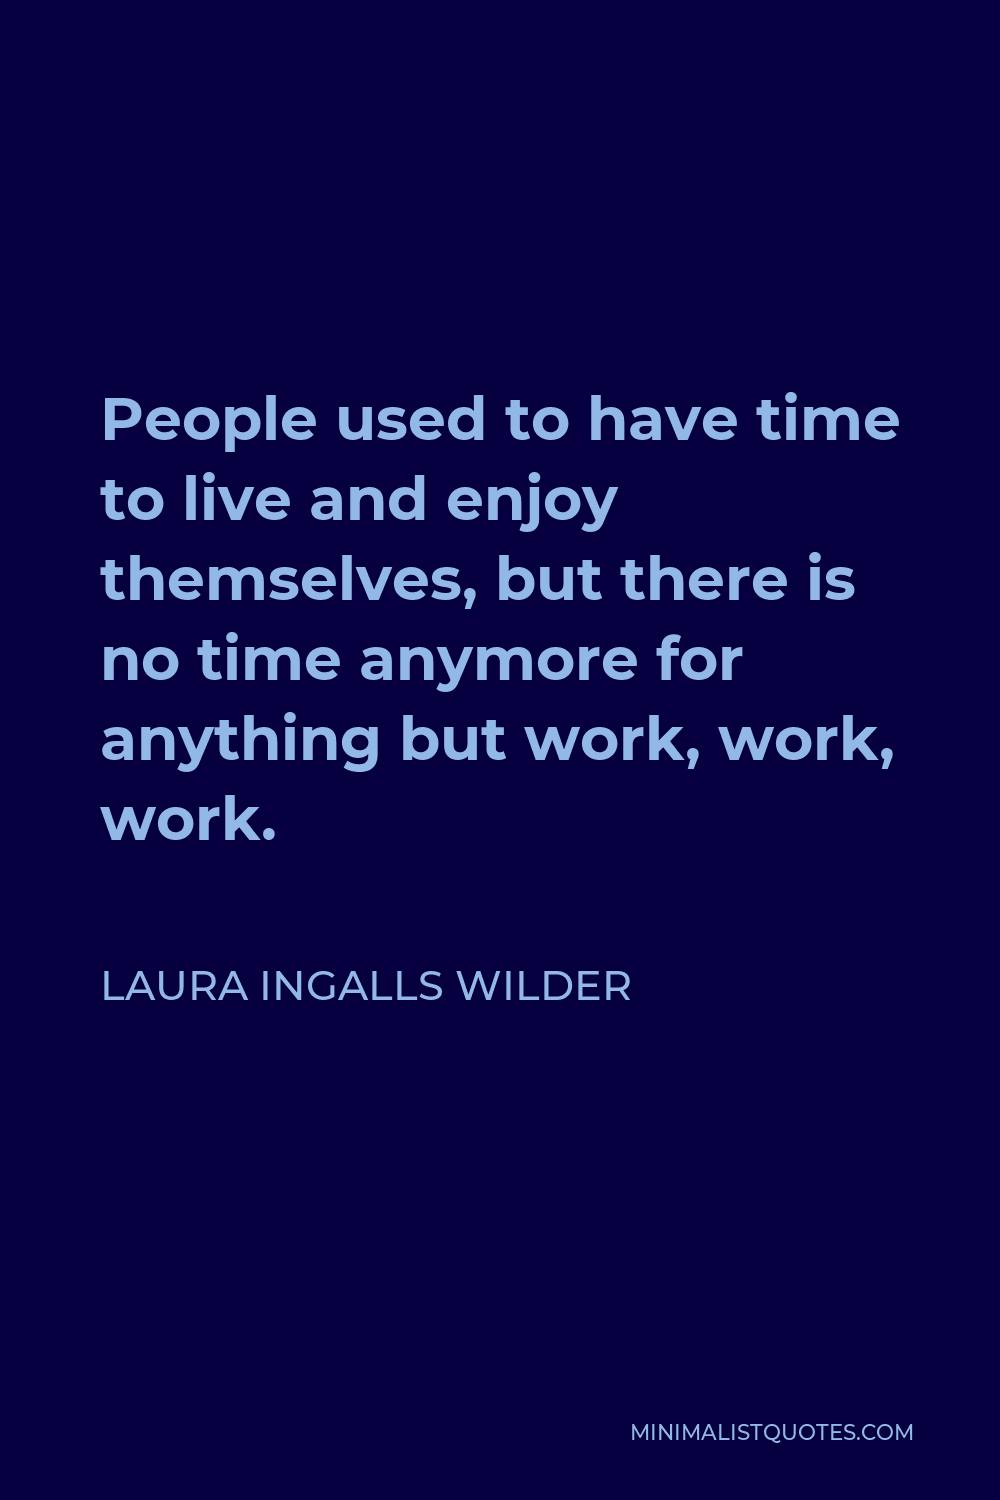 Laura Ingalls Wilder Quote - People used to have time to live and enjoy themselves, but there is no time anymore for anything but work, work, work.